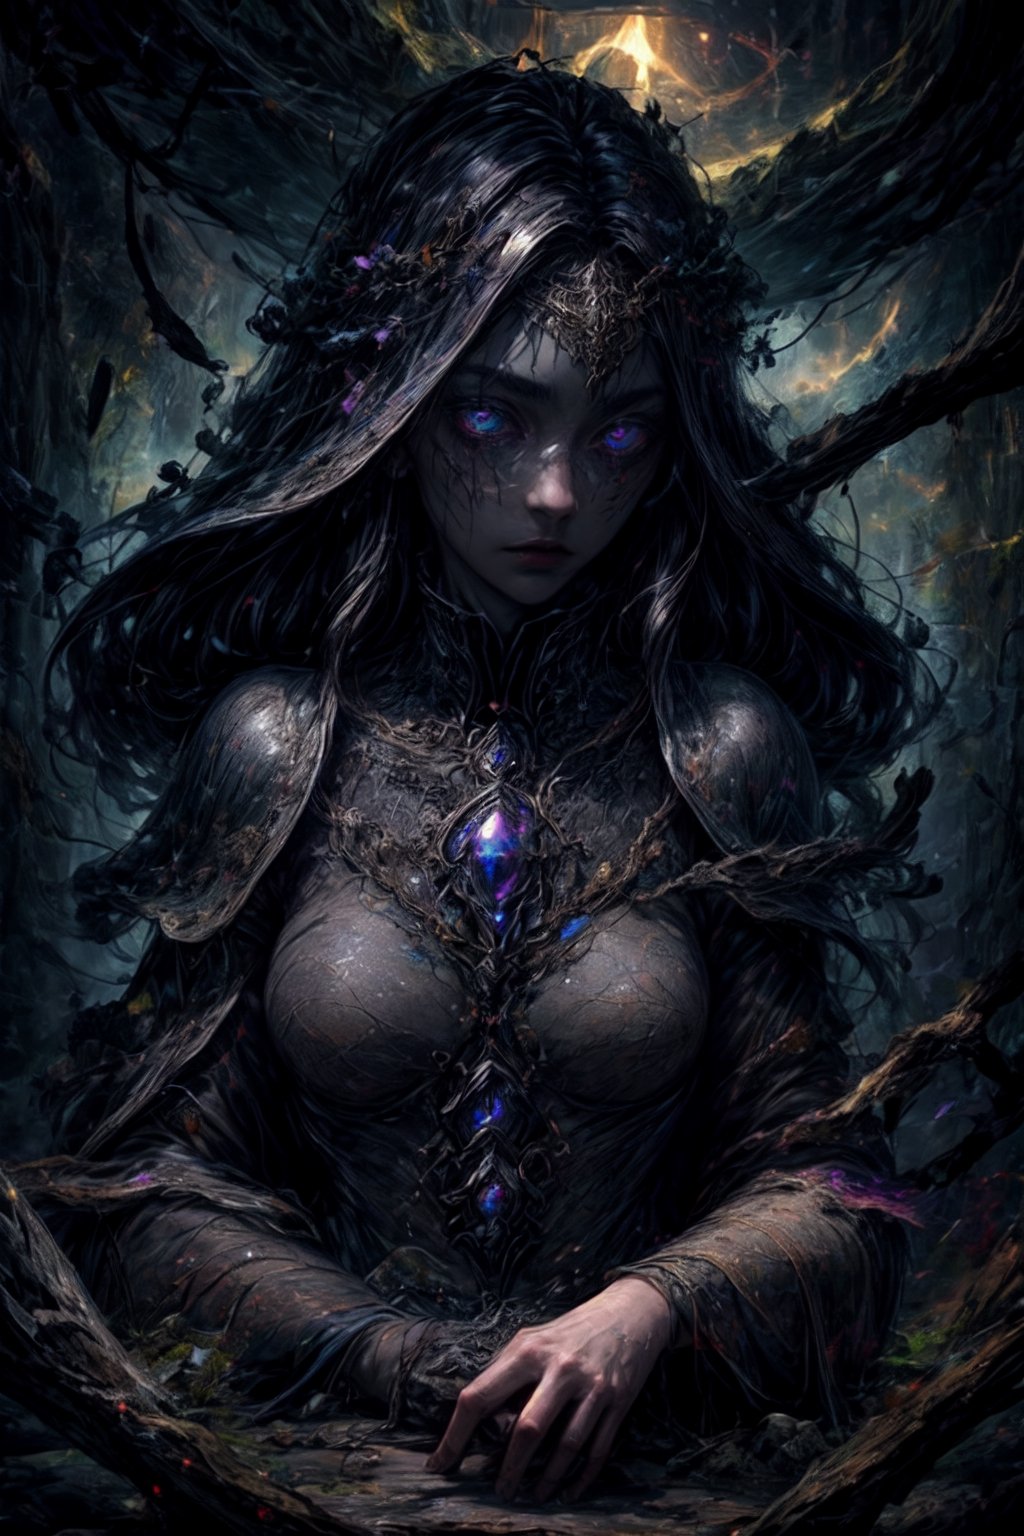 Within the dense, ancient forest stands a secluded East Slavic hut, its door creaking open to reveal the captivating presence of a Slavic sorceress. Her intense gaze emanates from radiant skin, contrasting with her raven-black hair. She's draped in an ethereal robe, adorned with gleaming silver jewelry studded with luminous gemstones. In her grasp is an ornate staff that pulsates with arcane energy. The hut's wooden walls, etched with cryptic runes, are sporadically illuminated by candles casting eerie shadows. Among the artifacts in the room are scrolls of ancient knowledge, potions simmering with mystical contents, and bones arranged in enigmatic patterns. Outside, an ominous storm brews, its lightning revealing the sinister silhouette of a raven perched on a windowsill, and cobwebs that hint at the presence of unseen entities. This haunting scene is a confluence of beauty and dark mysticism, where every object and description intertwines to create an enigmatic tableau.
